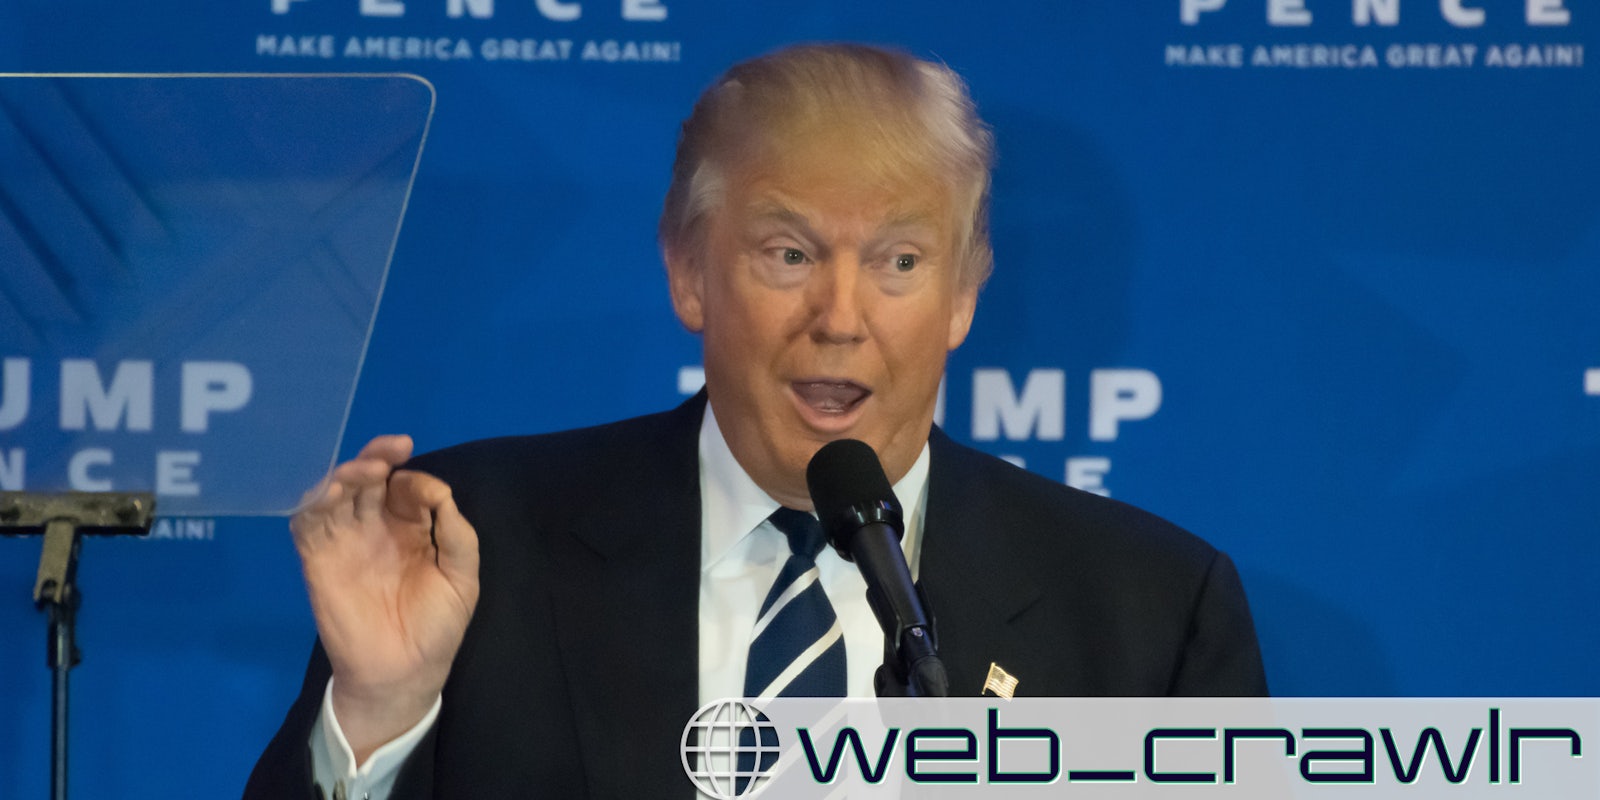 Donald Trump speaking into a mic. The Daily Dot newsletter web_crawlr logo is in the bottom right corner.